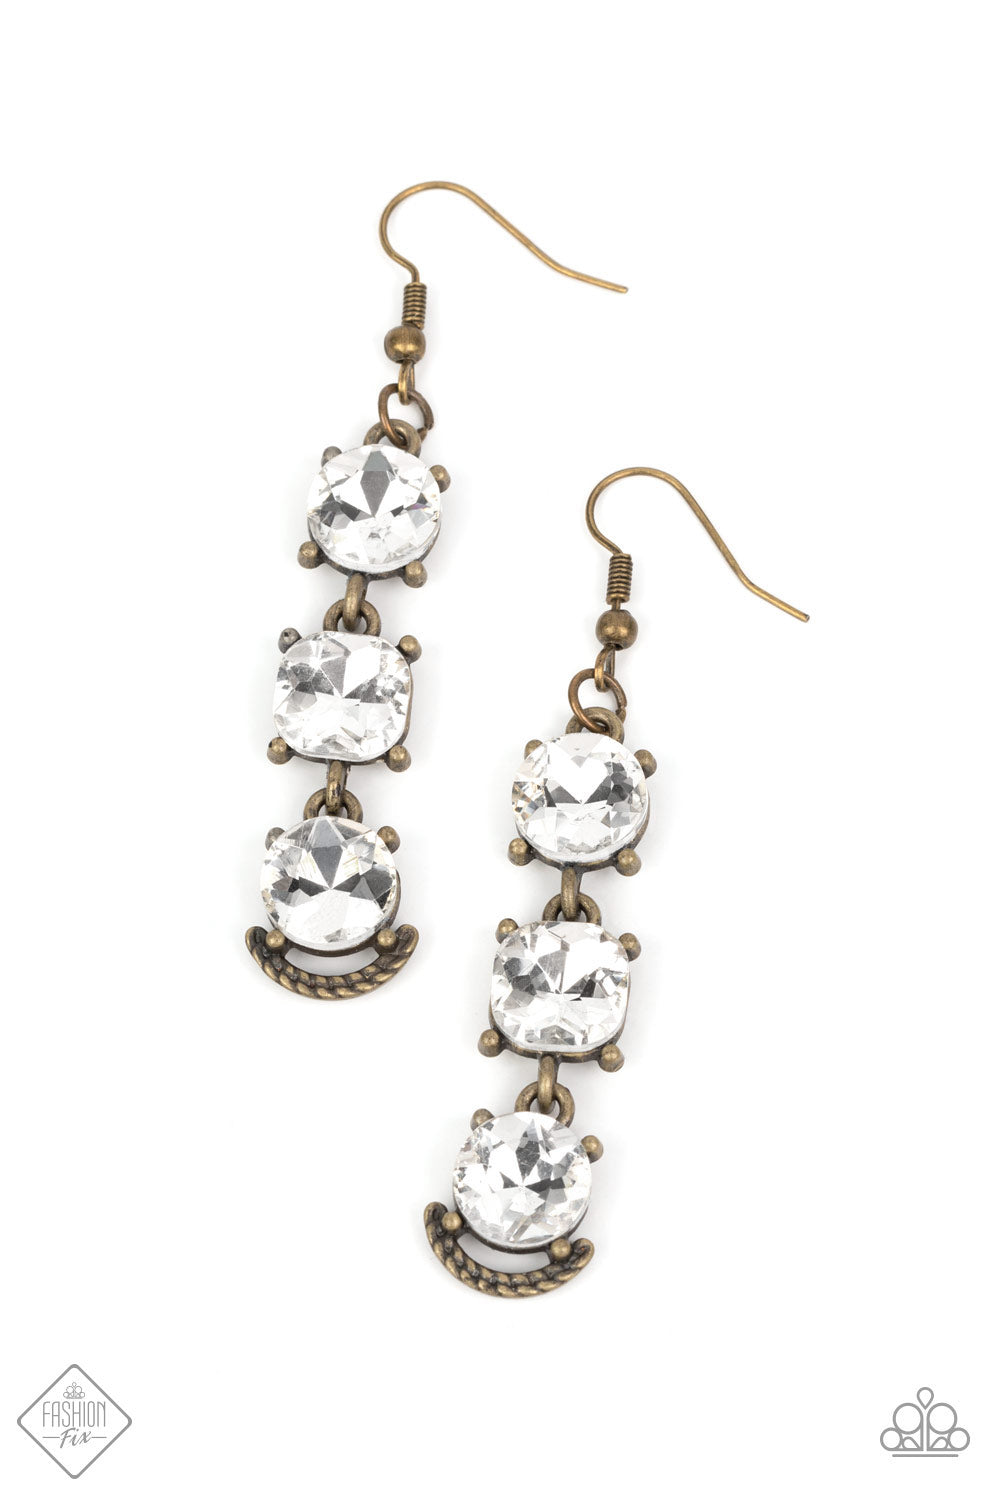 Paparazzi Determined to Dazzle - Brass Earrings - Fashion Fix - A Finishing Touch Jewelry